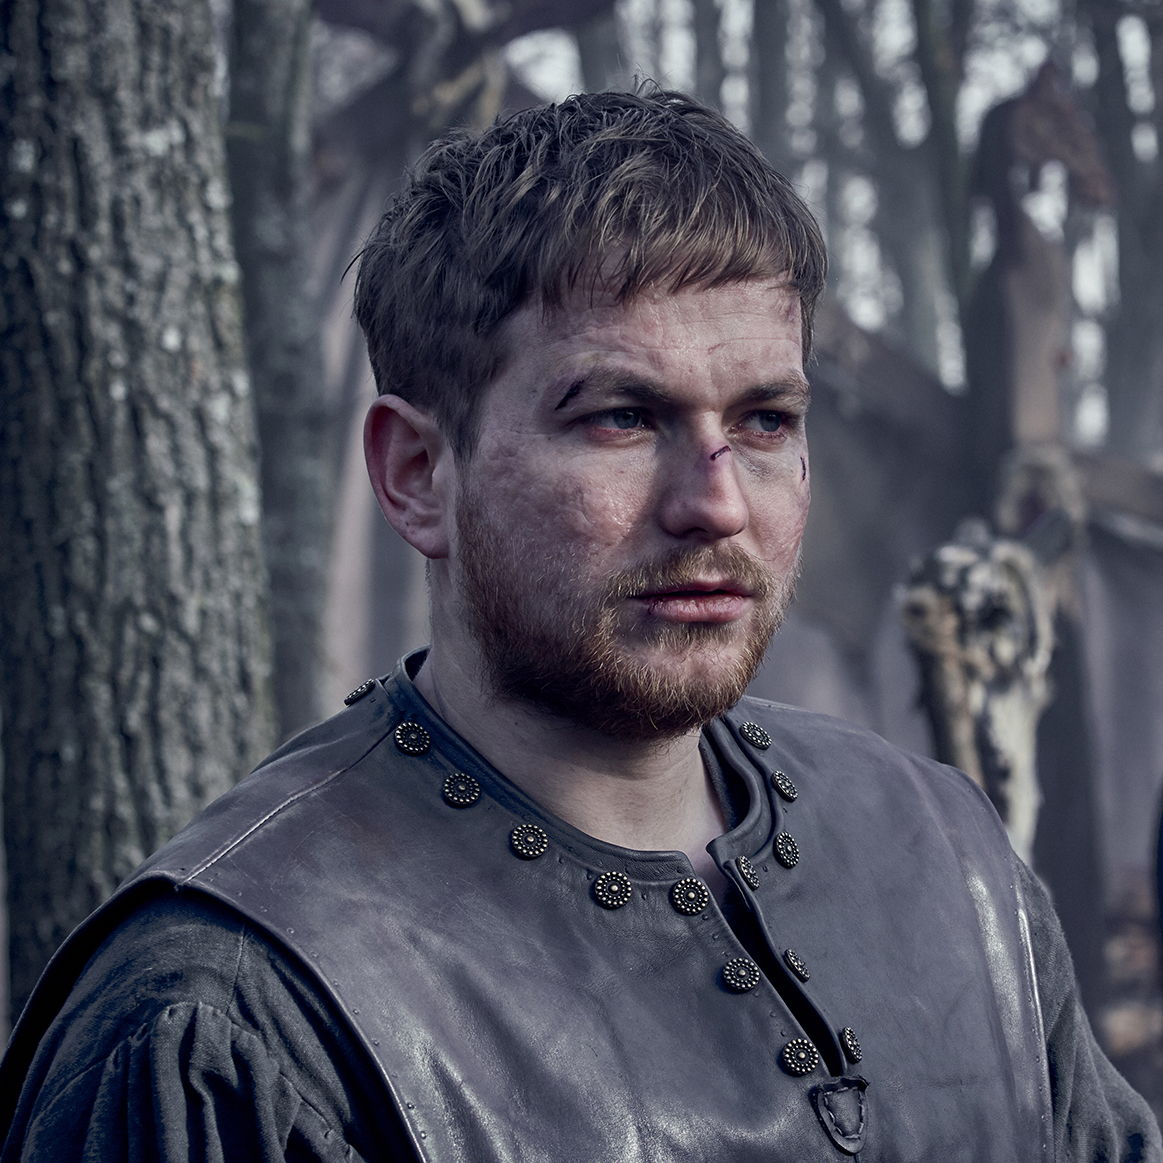 In The Last Kingdom, is Guthred and Guthrum supposed to be the